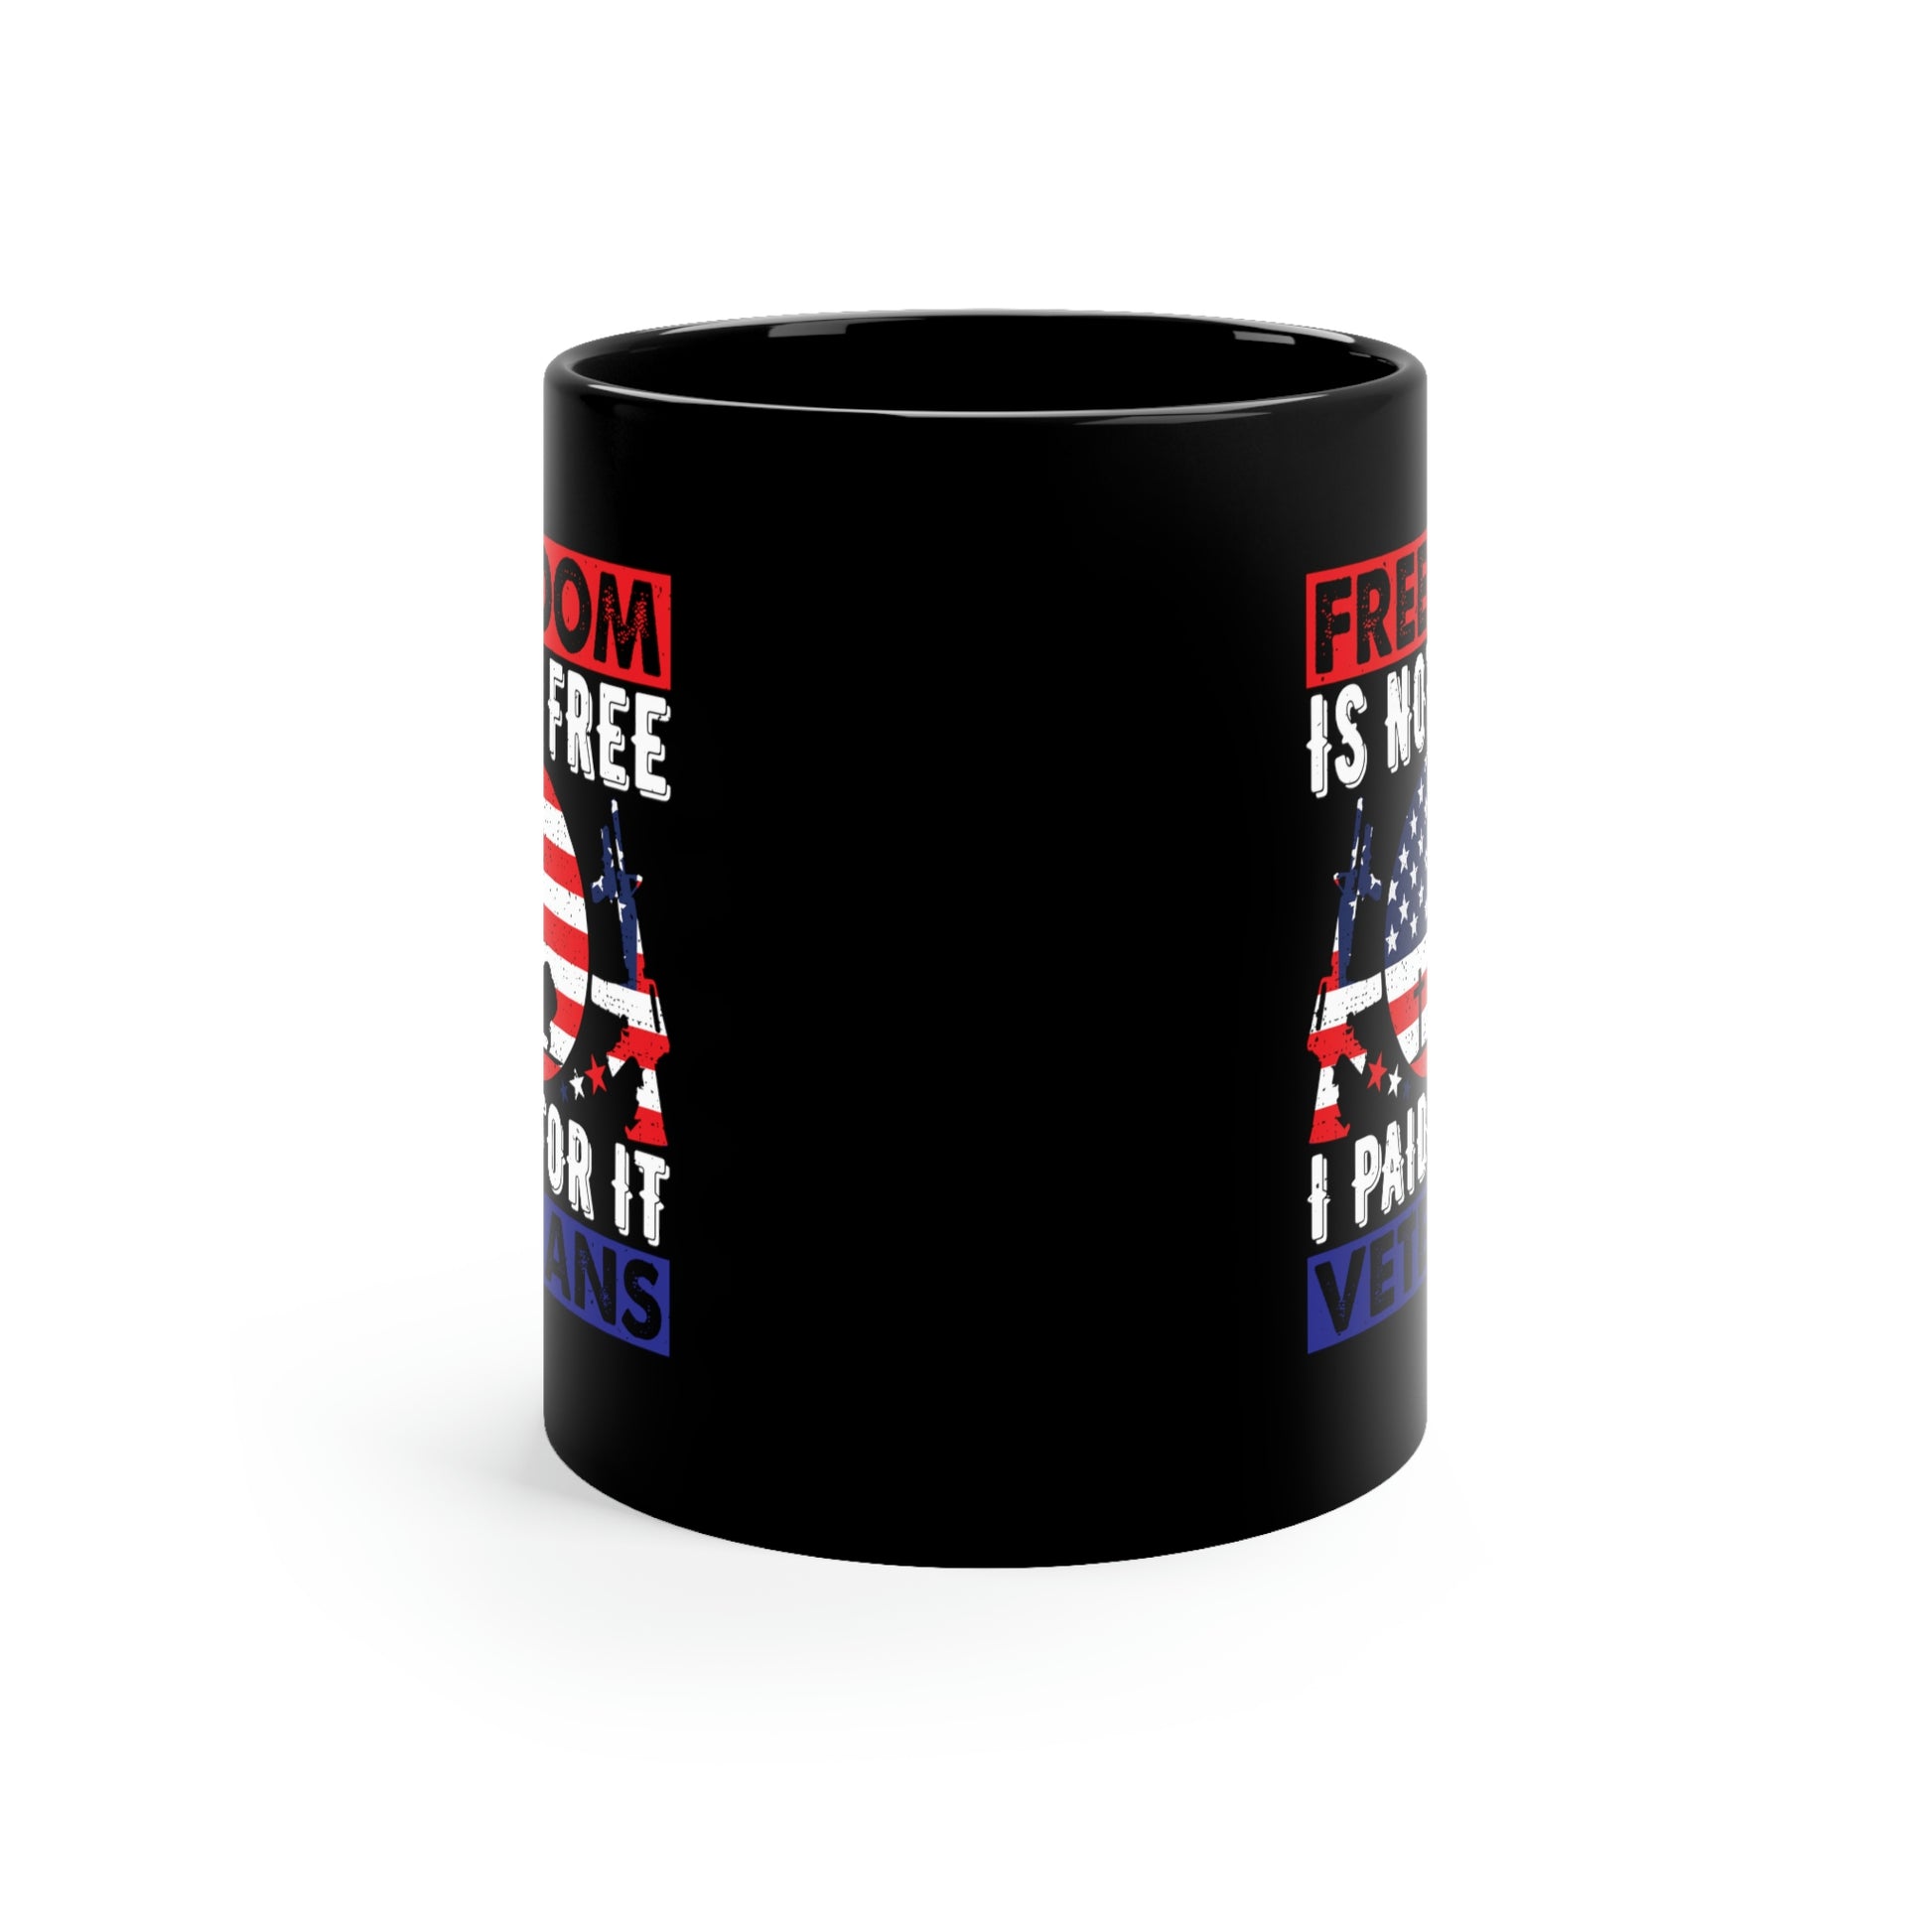 "Veterans - Freedom Is Not Free" Coffee Mug - Weave Got Gifts - Unique Gifts You Won’t Find Anywhere Else!